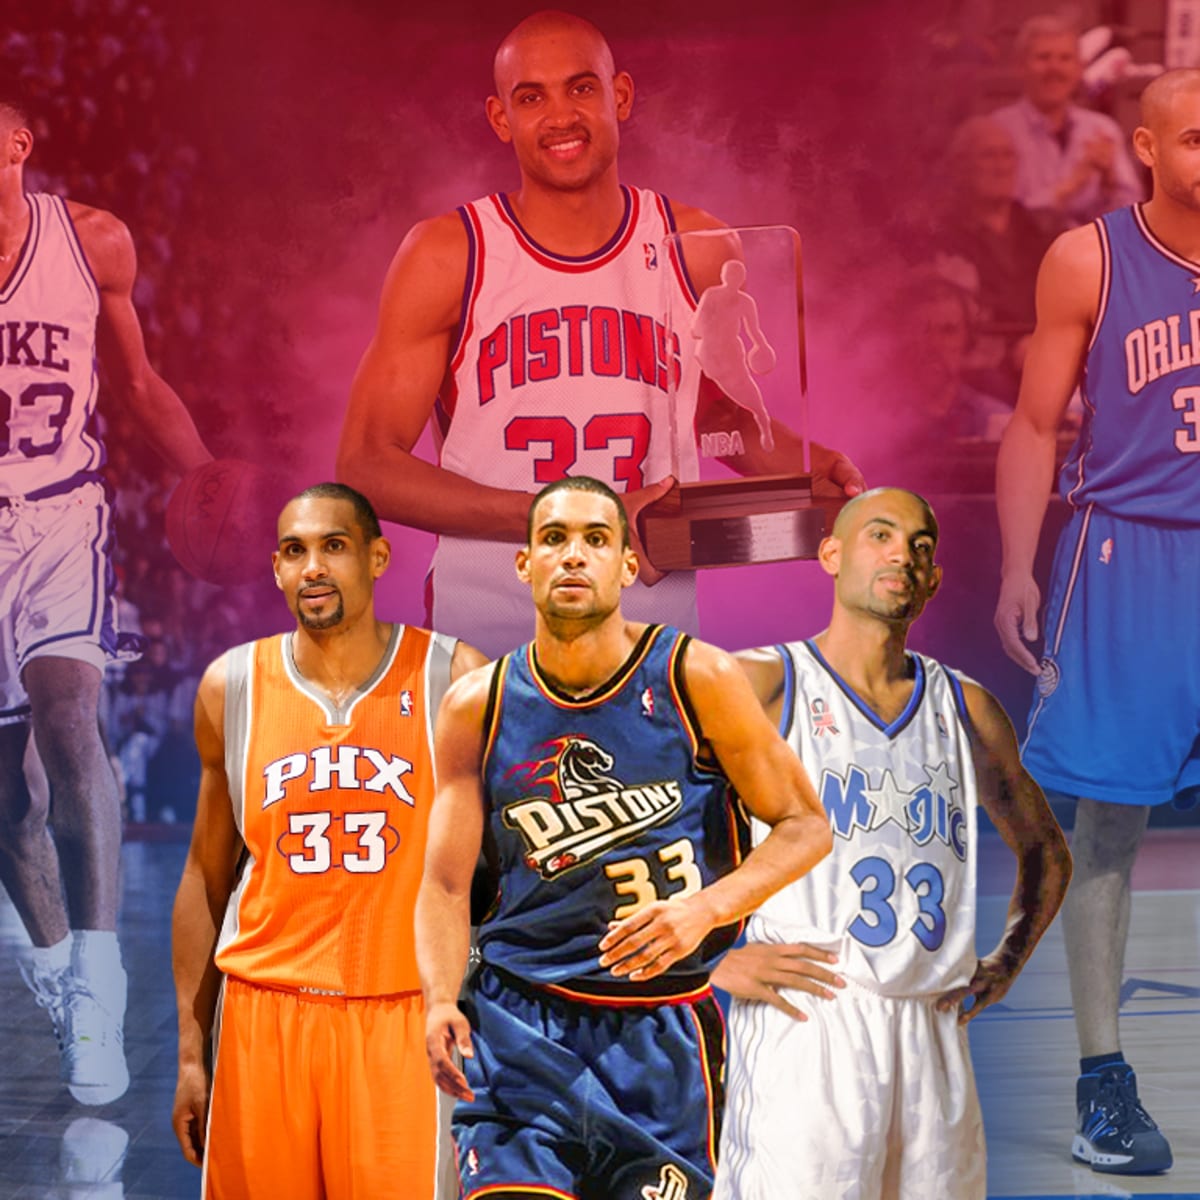 Grant Hill First Rookie To Lead NBA All Star Voting